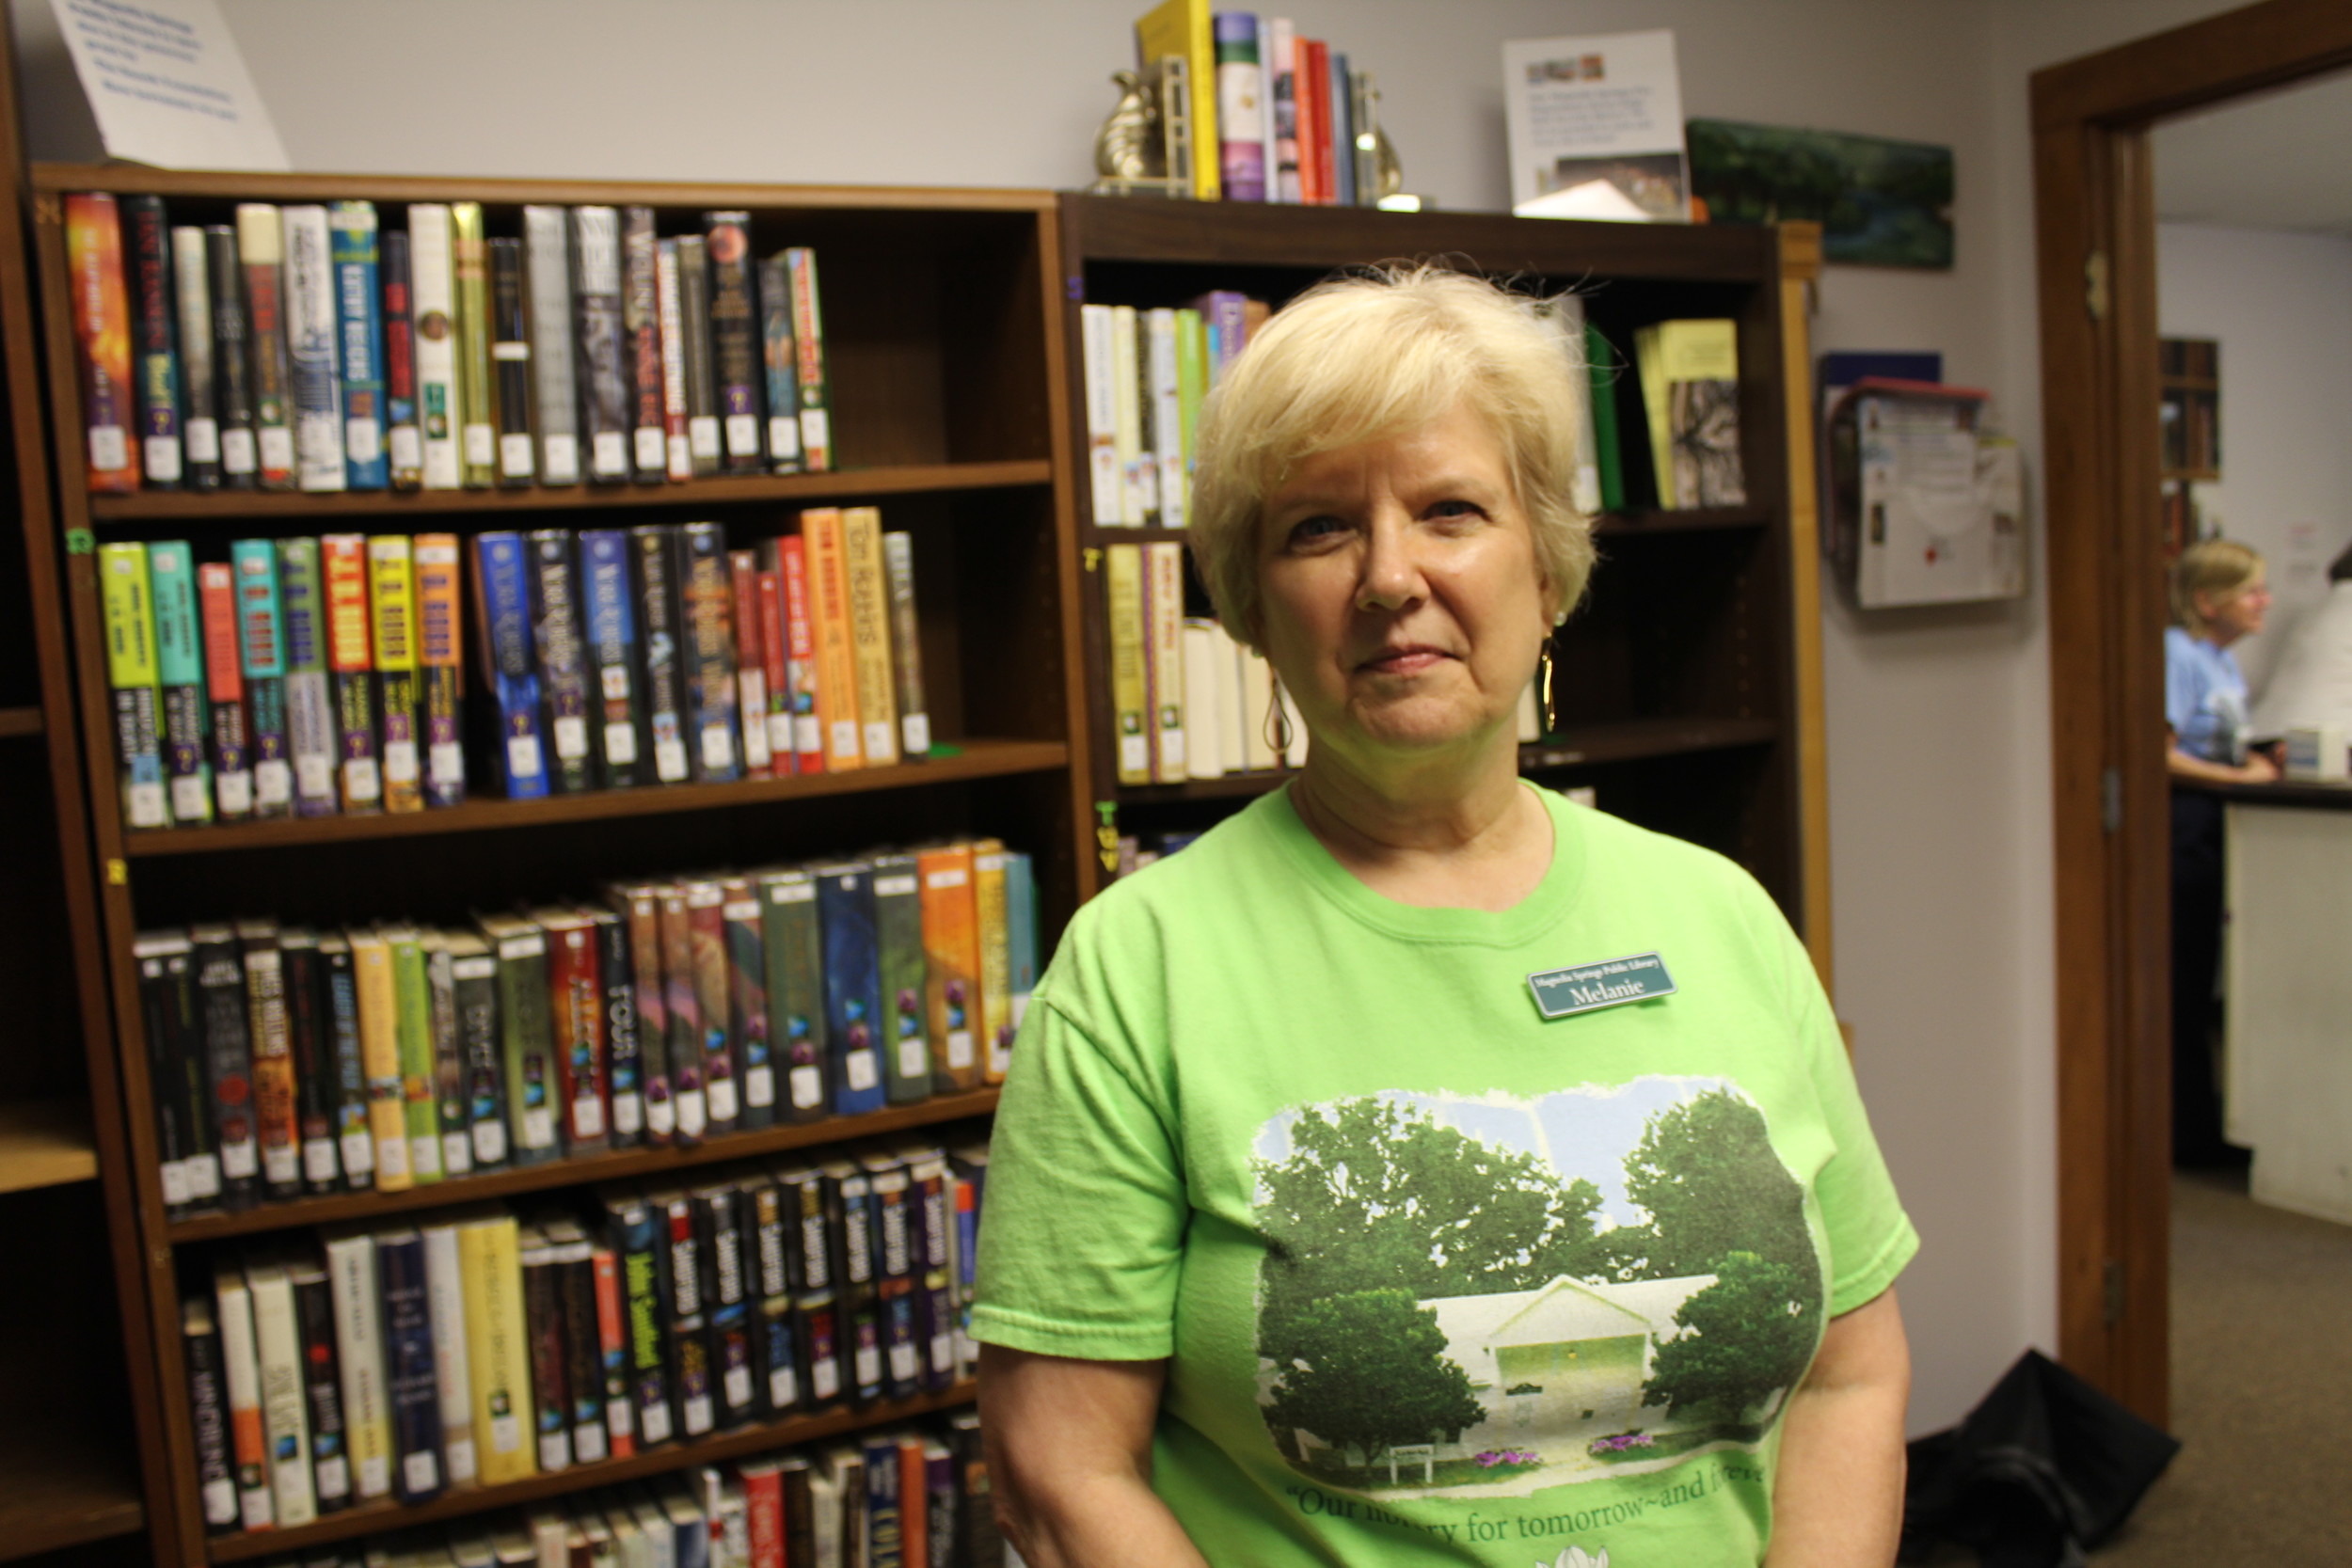 Melanie O’Donnell took the position as librarian of the Magnolia Springs Public Library on Feb. 1.